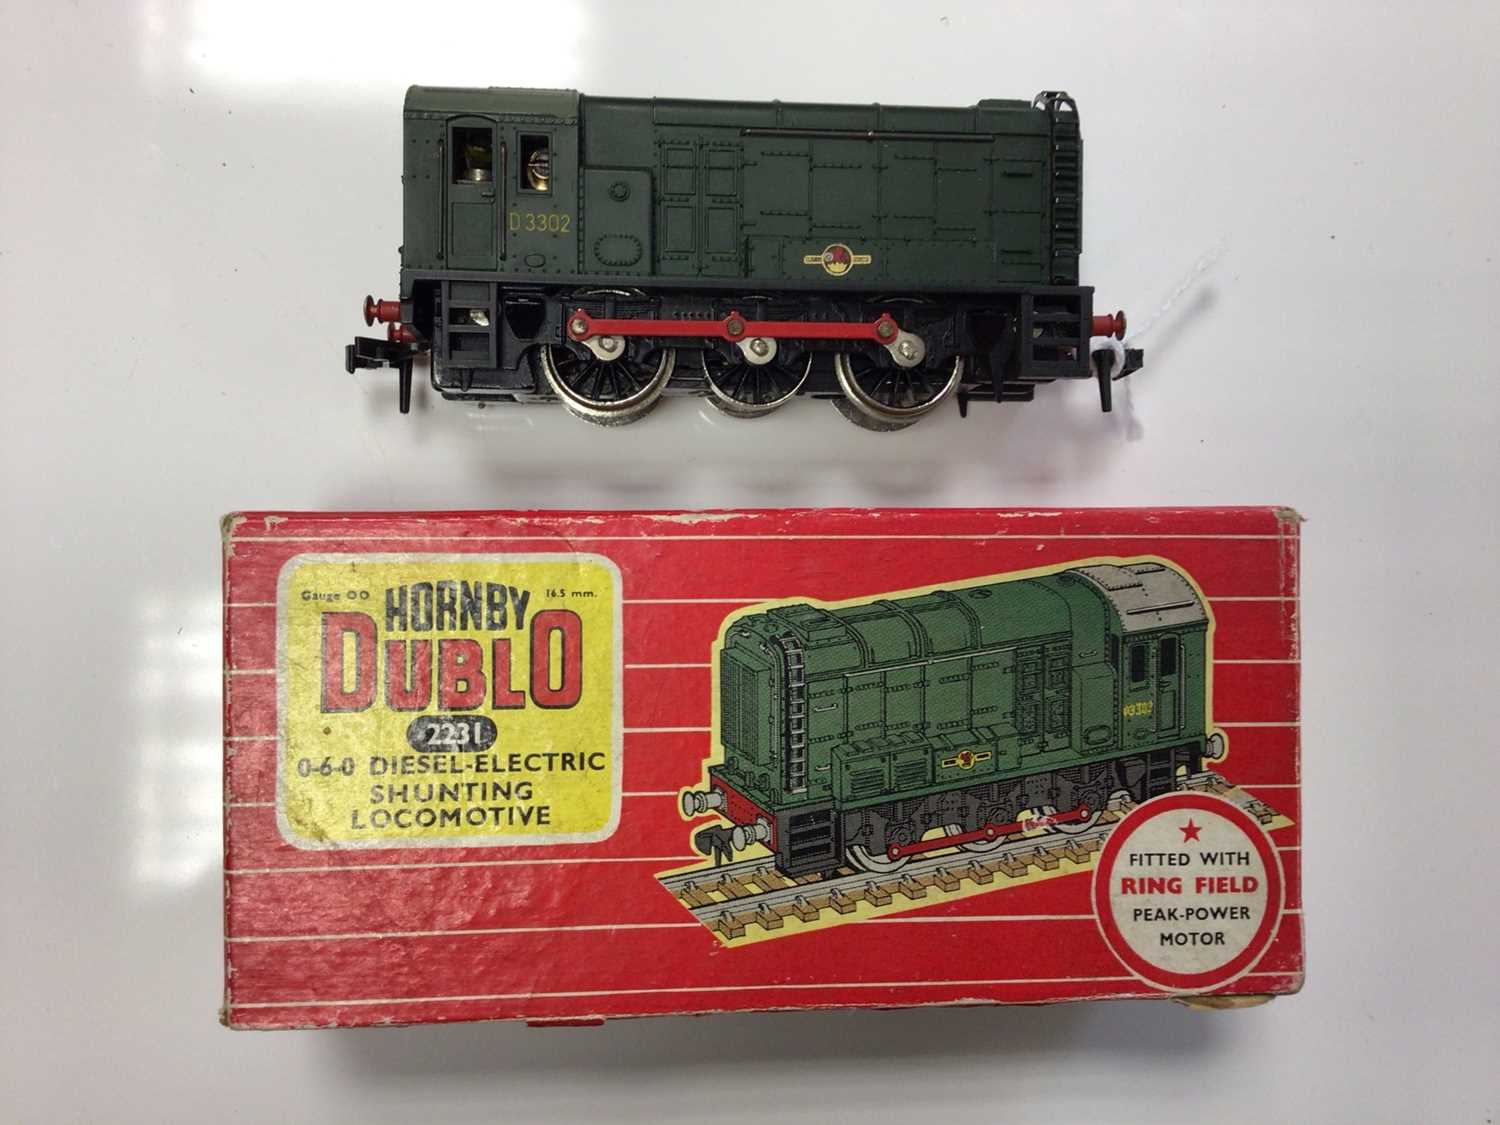 Hornby Duplo 3 rail BR green Co-Bo diesel electric locomotive D 5713, boxed 3233 and BR green 2 rail